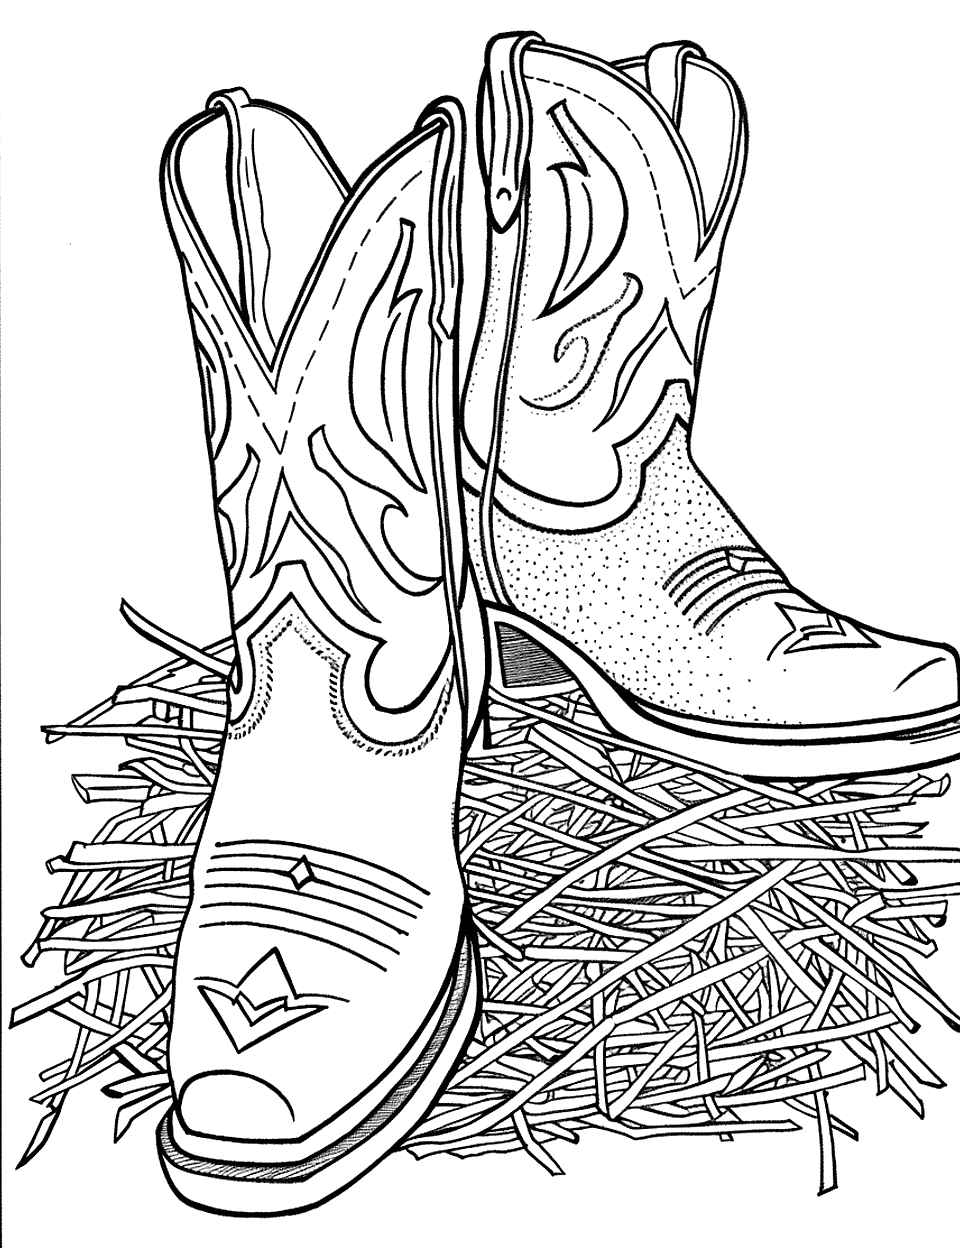 Cowboy Boots Shoe Coloring Page - Cowboy boots resting on a haystack.